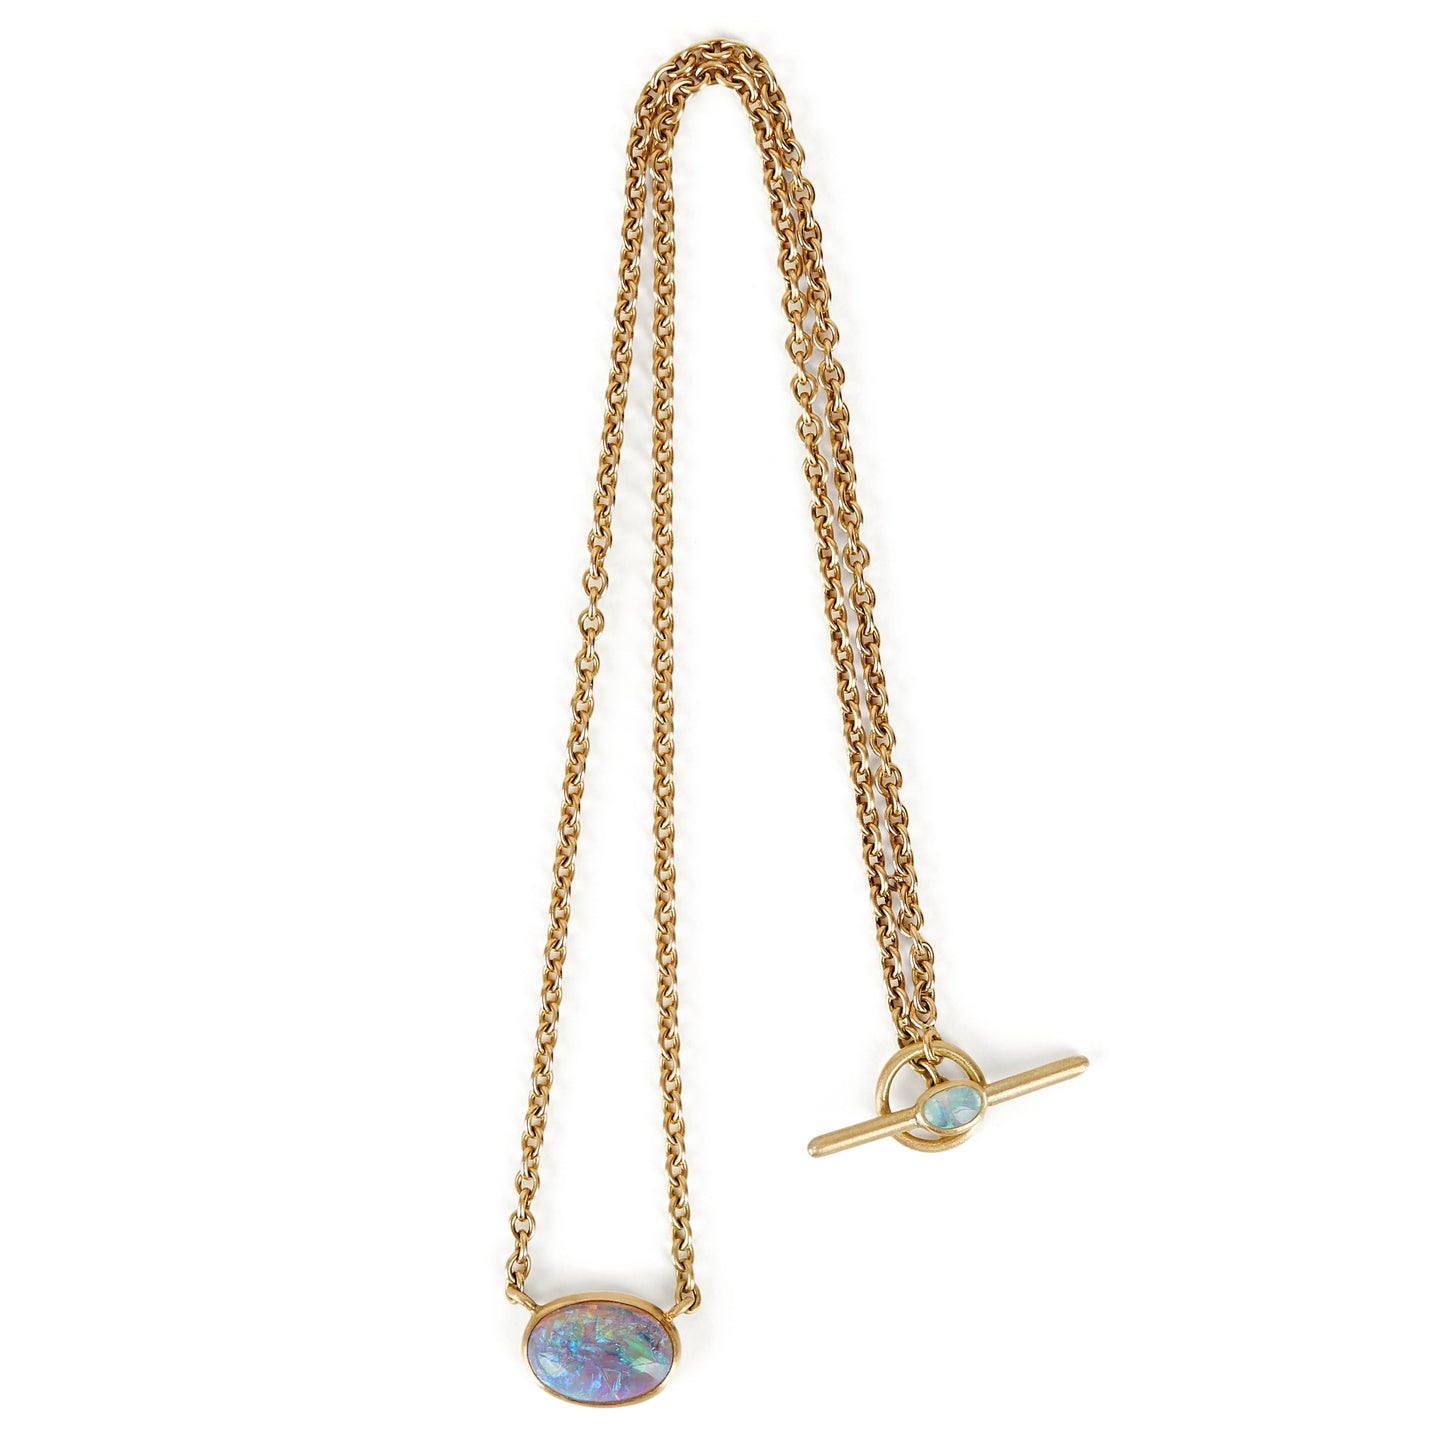 Opal Necklace, 18ct Gold